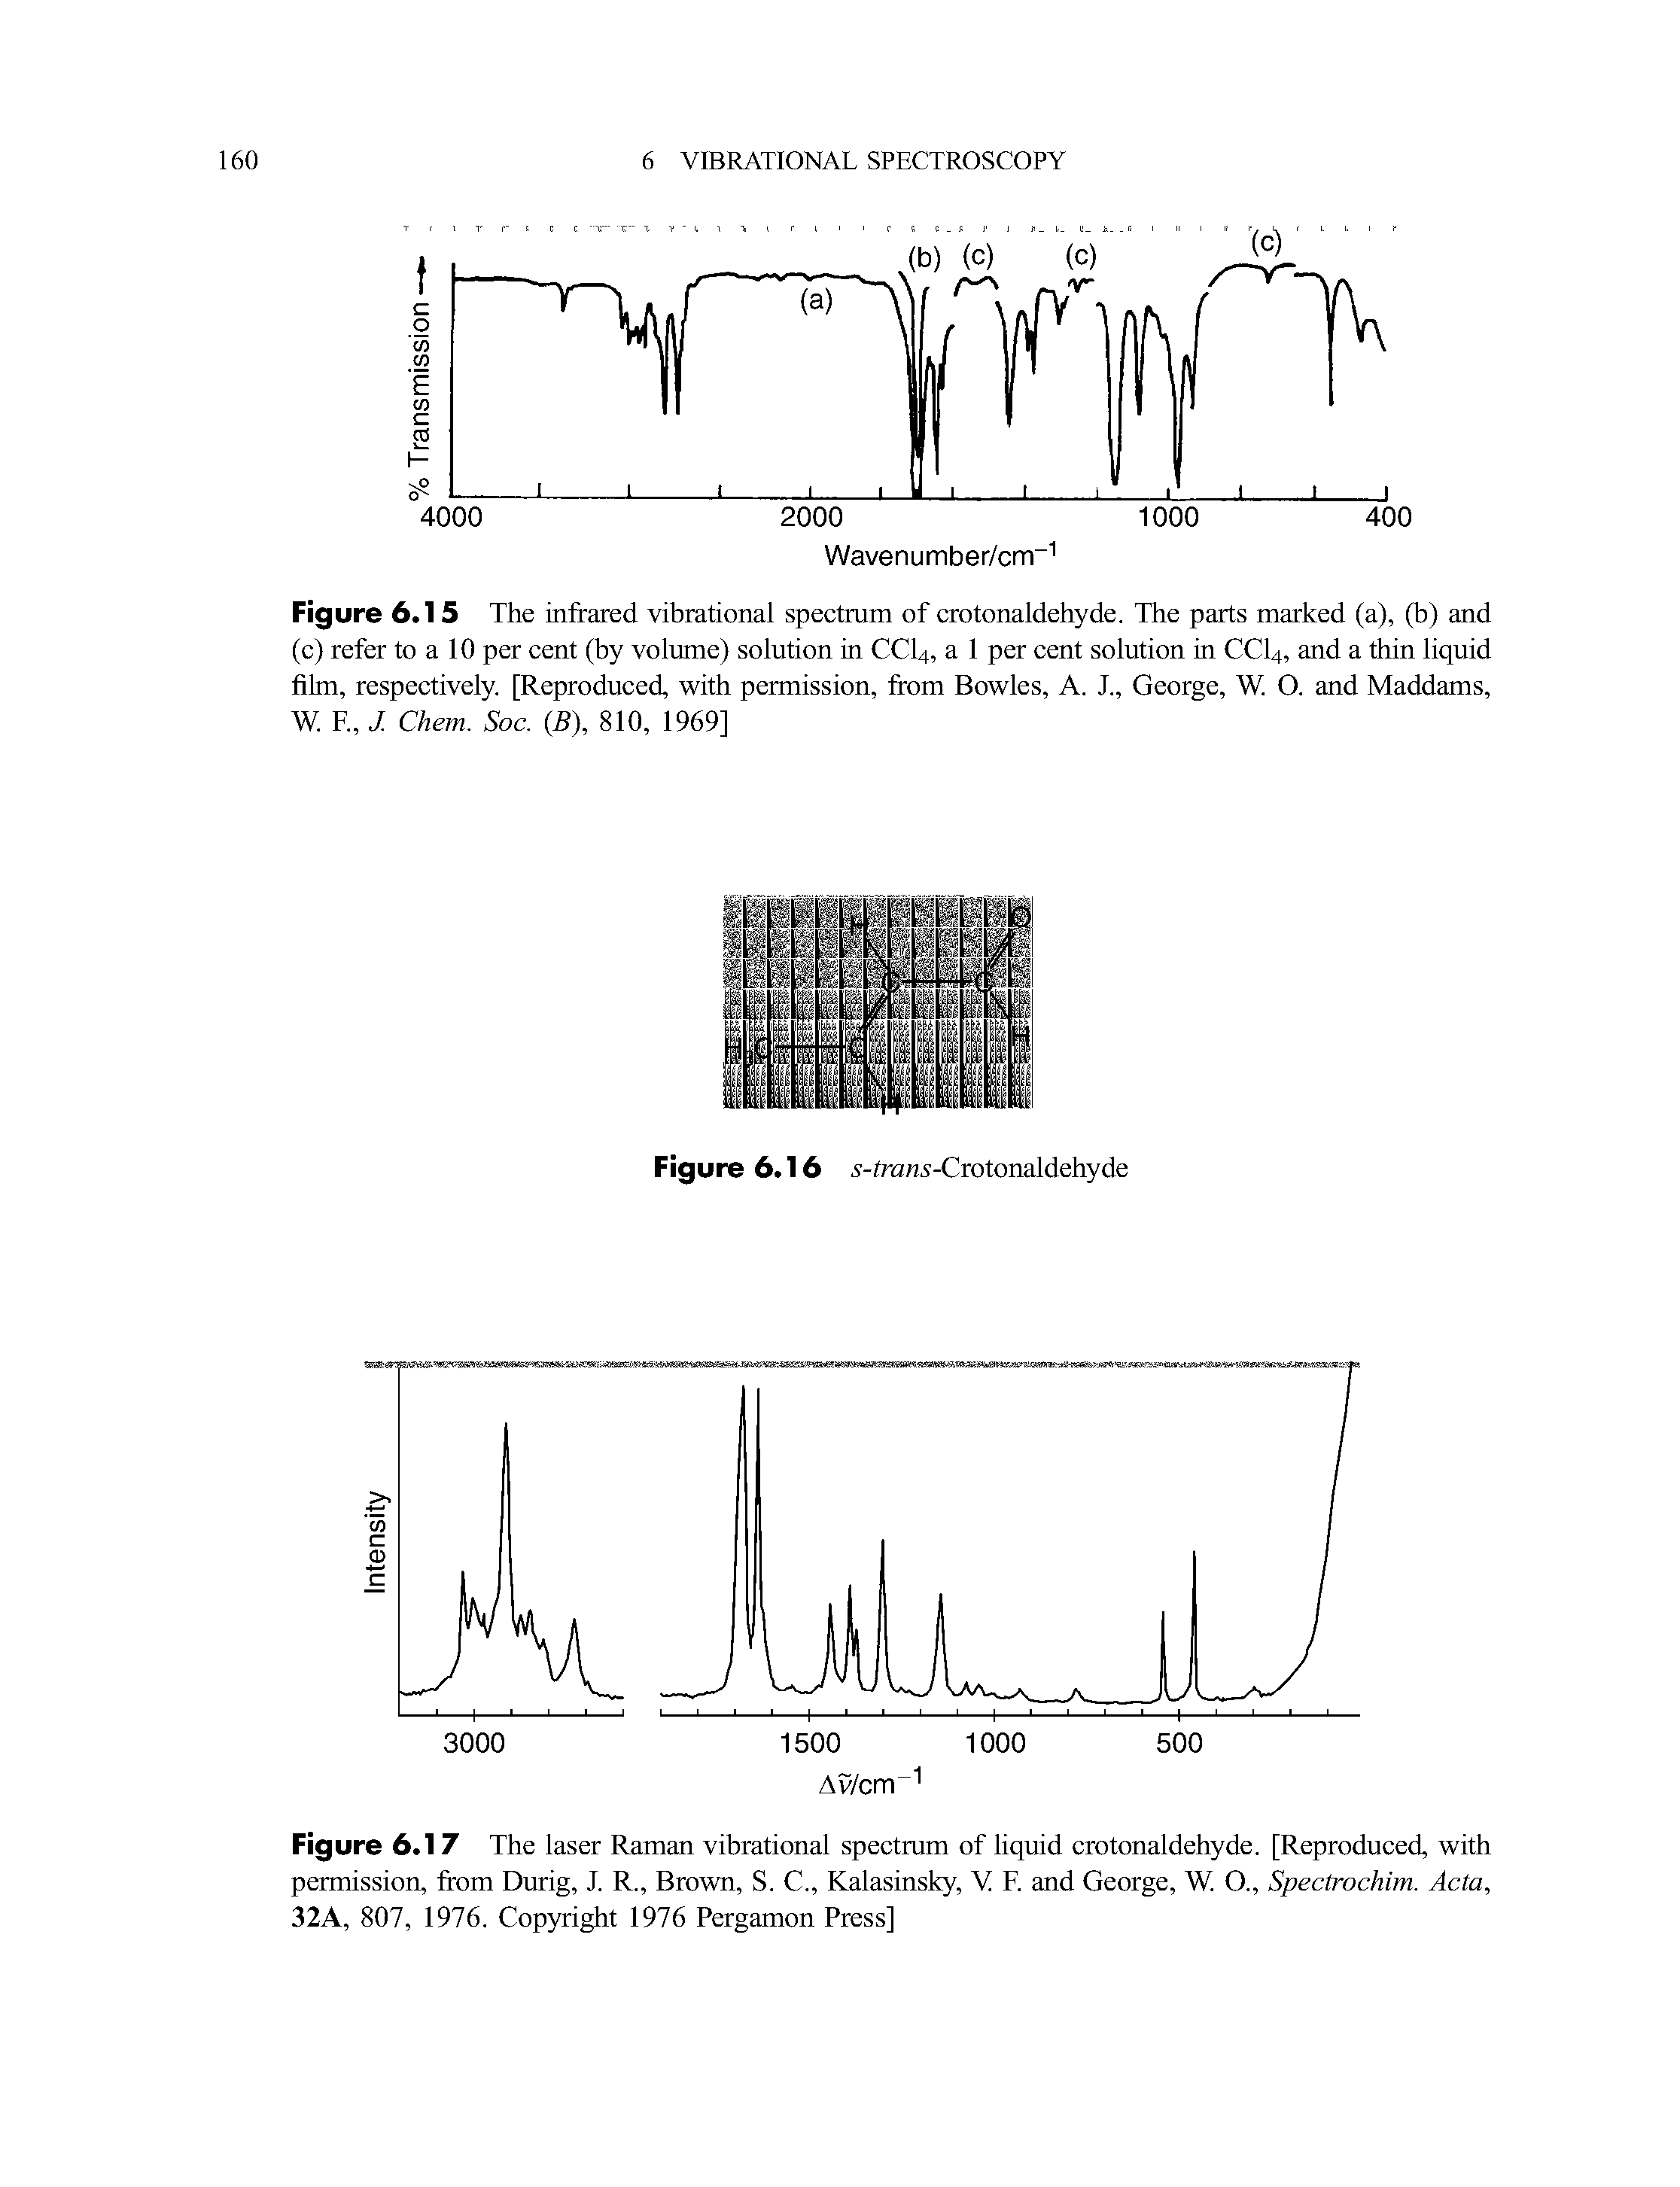 Figure 6.15 The infrared vibrational spectrum of crotonaldehyde. The parts marked (a), (b) and (c) refer to a 10 per cent (by volume) solution in CCI4, a 1 per cent solution in CCI4, and a thin liquid film, respectively. [Reproduced, with permission, from Bowles, A. J., George, W. O. and Maddams, W. F J. Chem. Soc. (B), 810, 1969]...